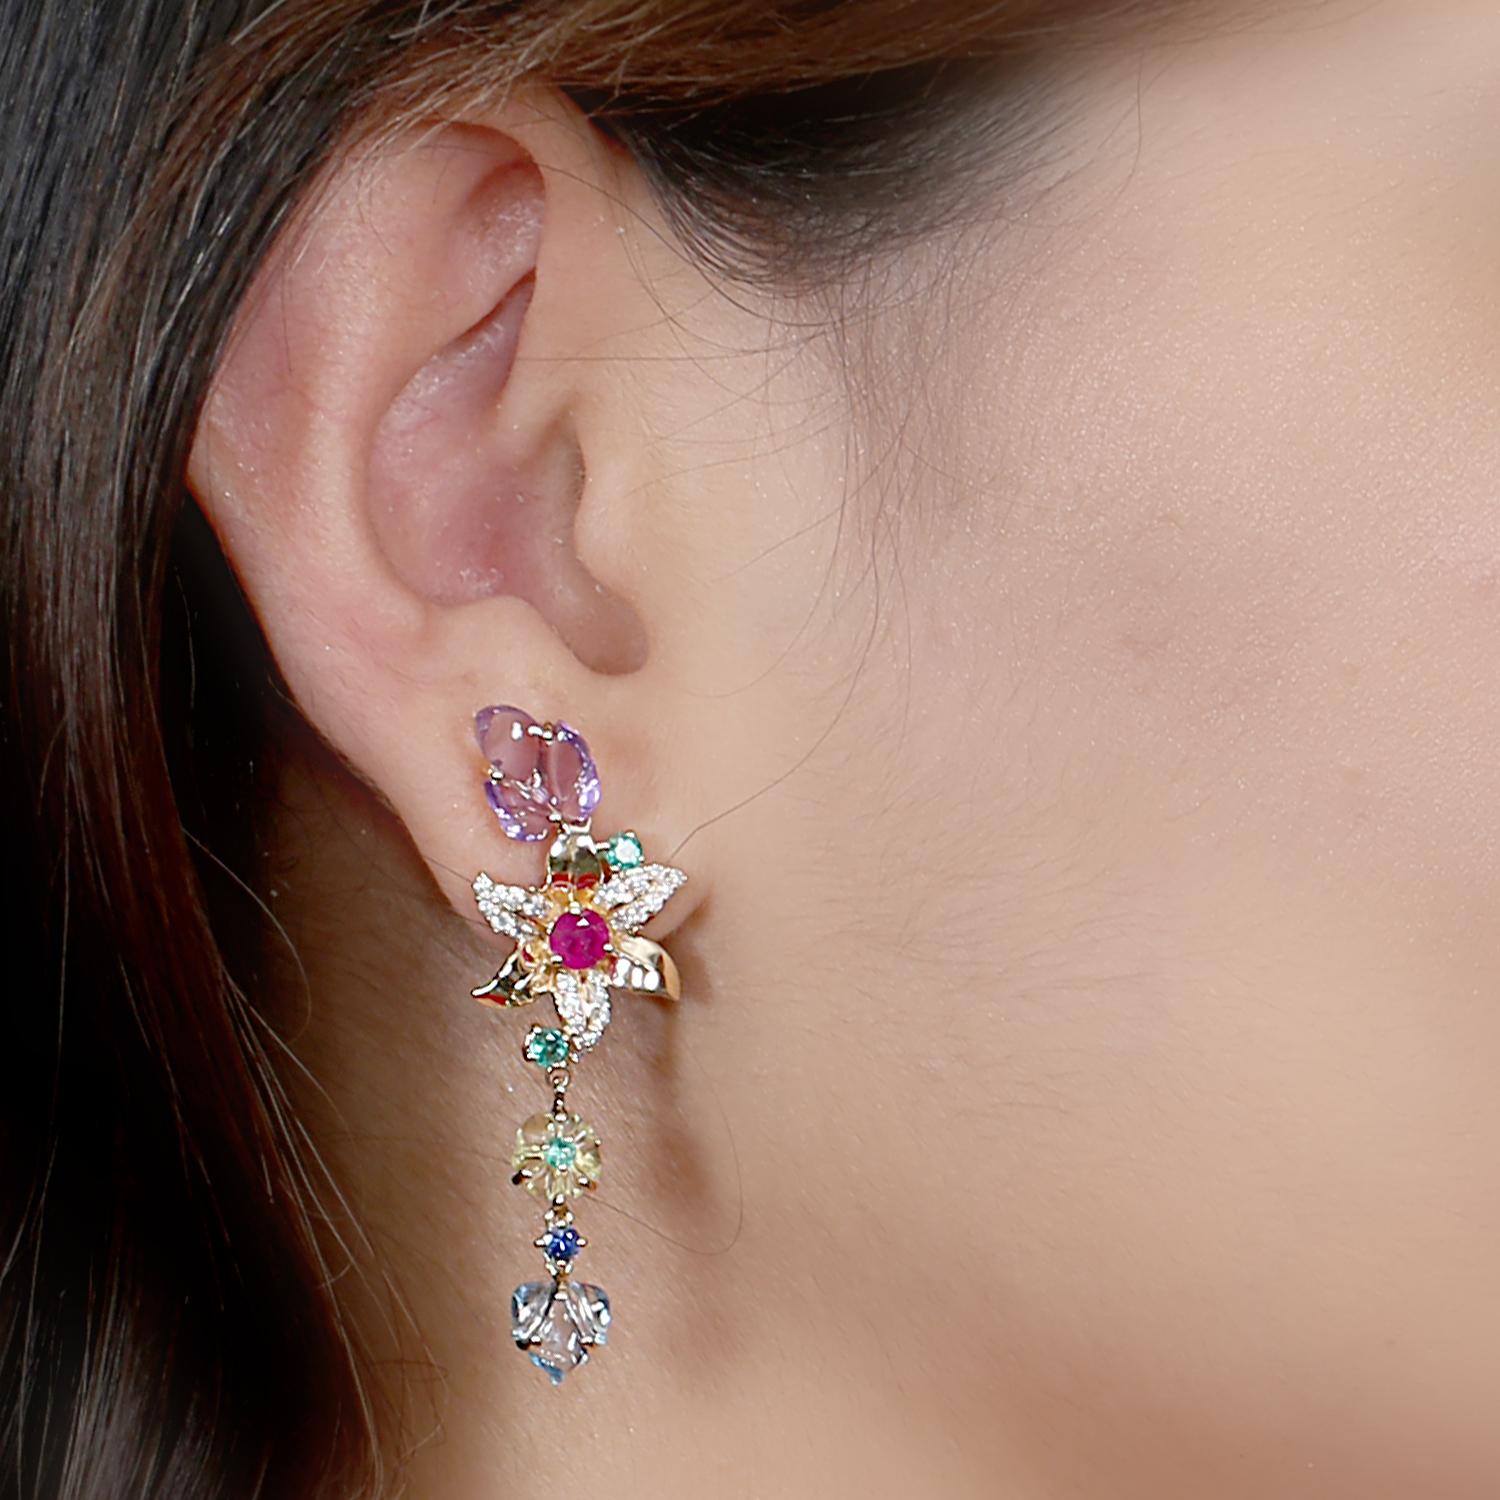 Cast in 18-karat gold. These beautiful earrings are set with 6.76 carats of carved multi gemstone, emerald, topaz, amethyst, citrine, ruby and .45 carats of sparkling diamonds.  See other flower collection matching pieces.

FOLLOW  MEGHNA JEWELS